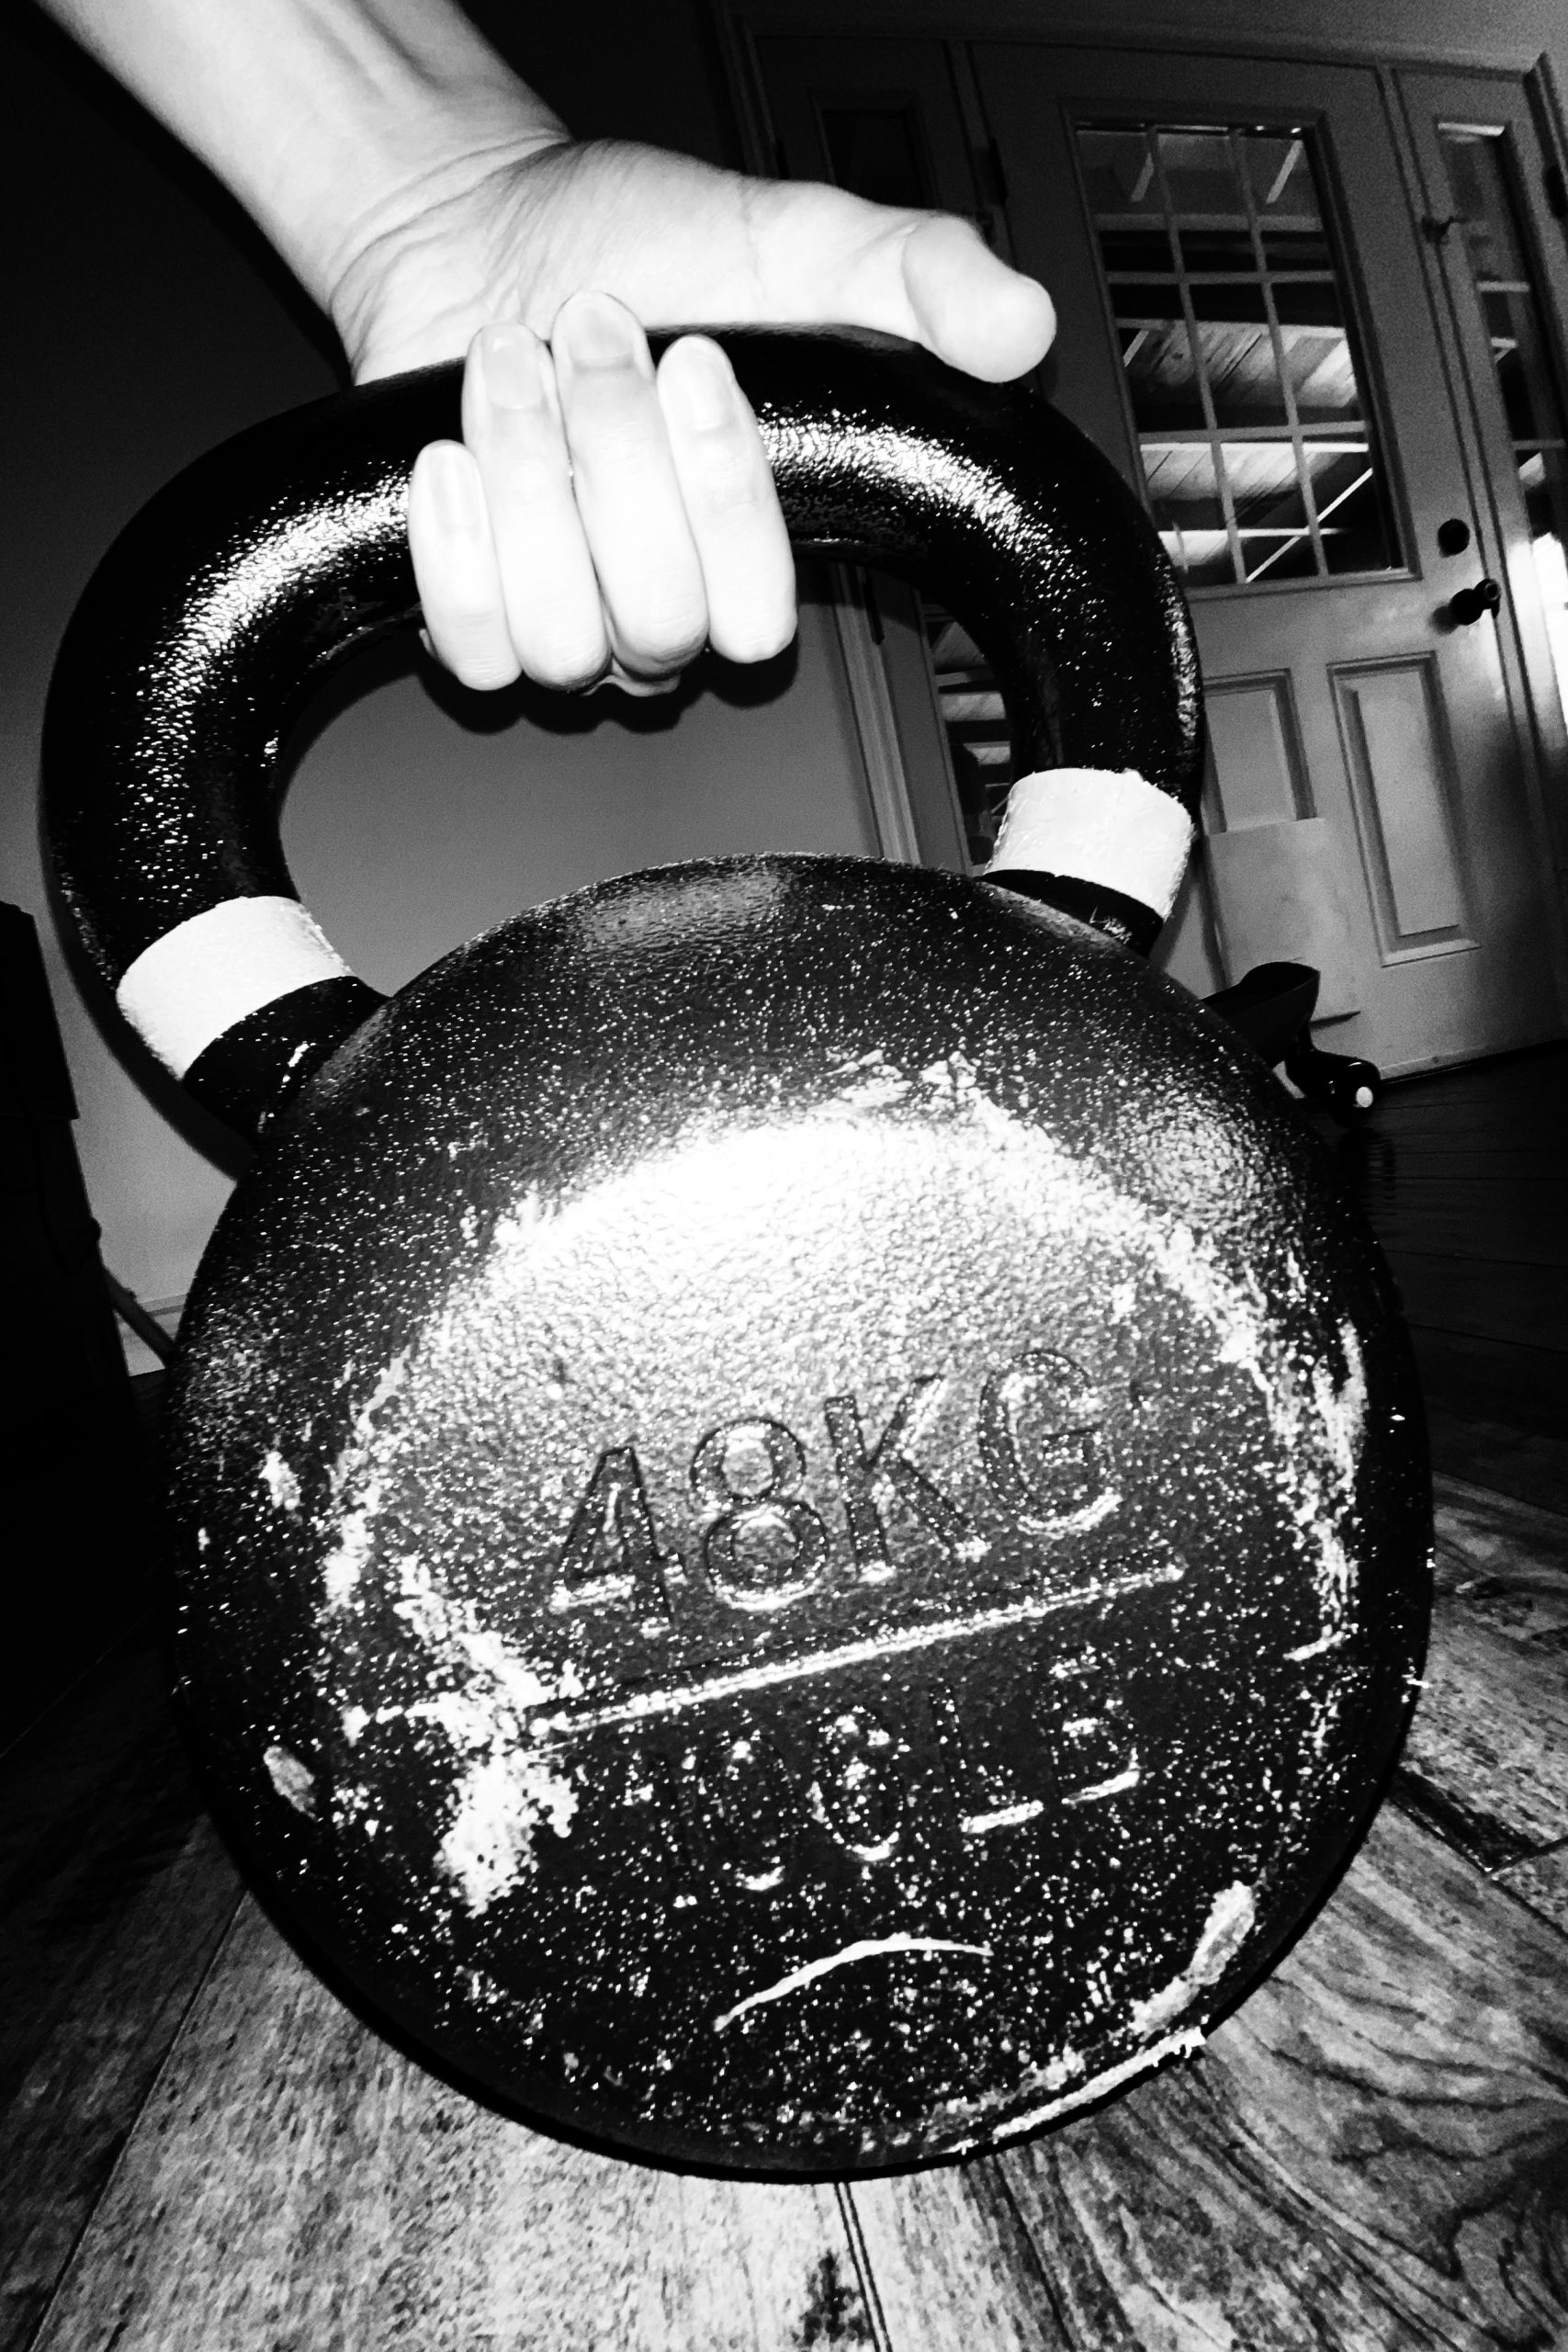 Review: THE BEAST 48KG (105 Pound) Kettlebell